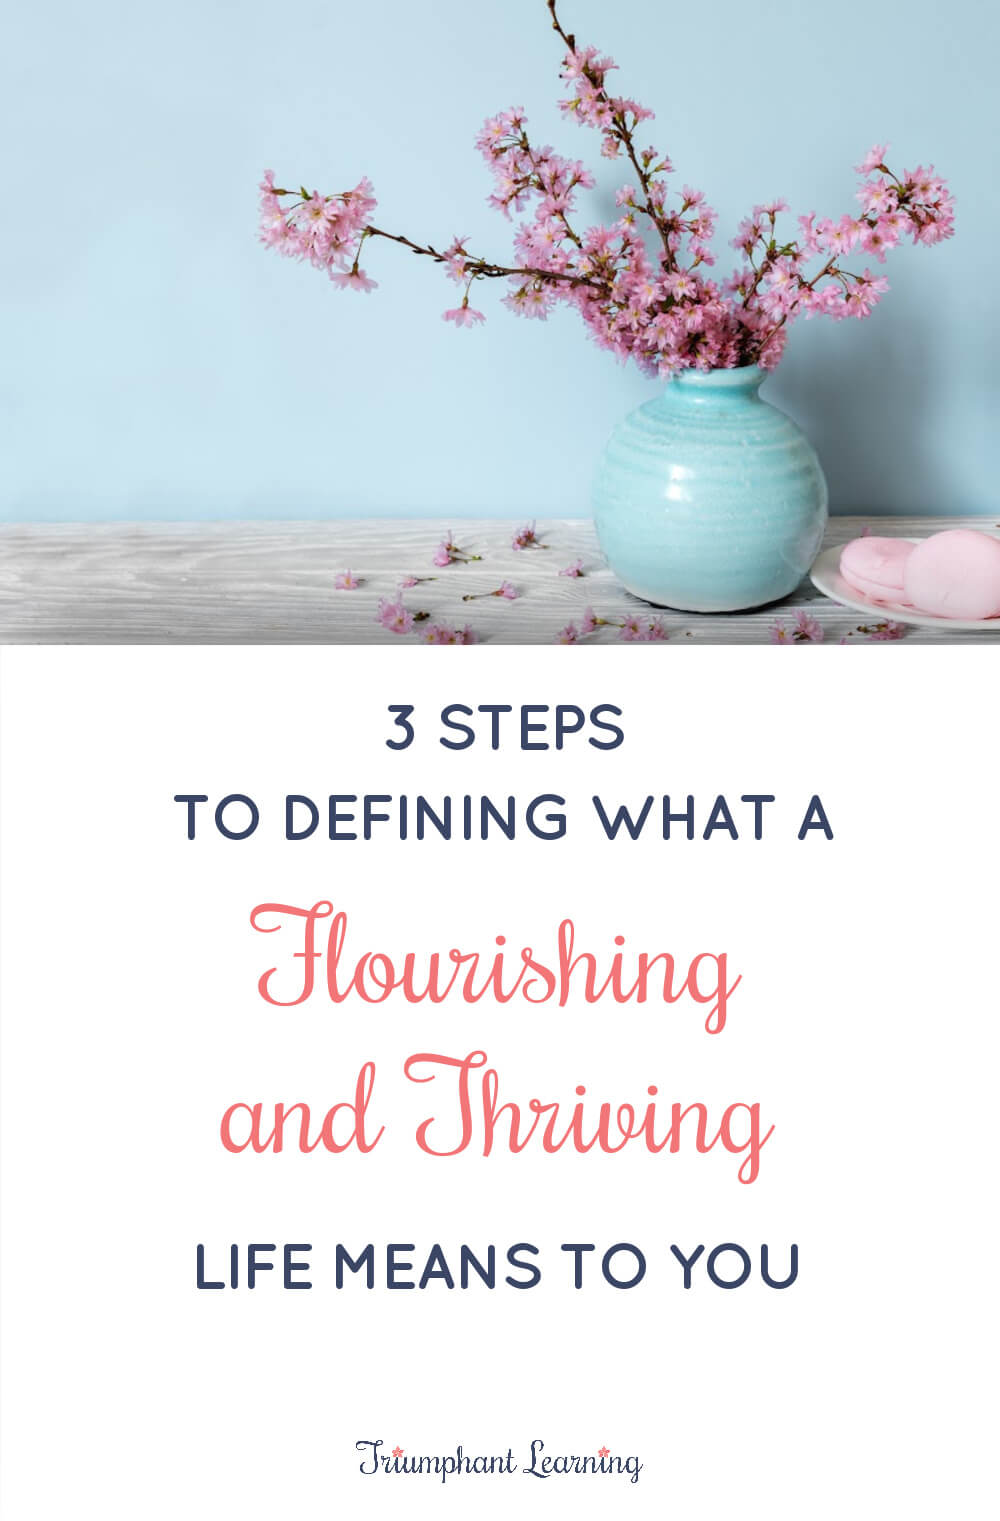 Flourishing and thriving mean something different to everyone. Learn three steps to define what flourishing and thriving mean to you. via @TriLearning